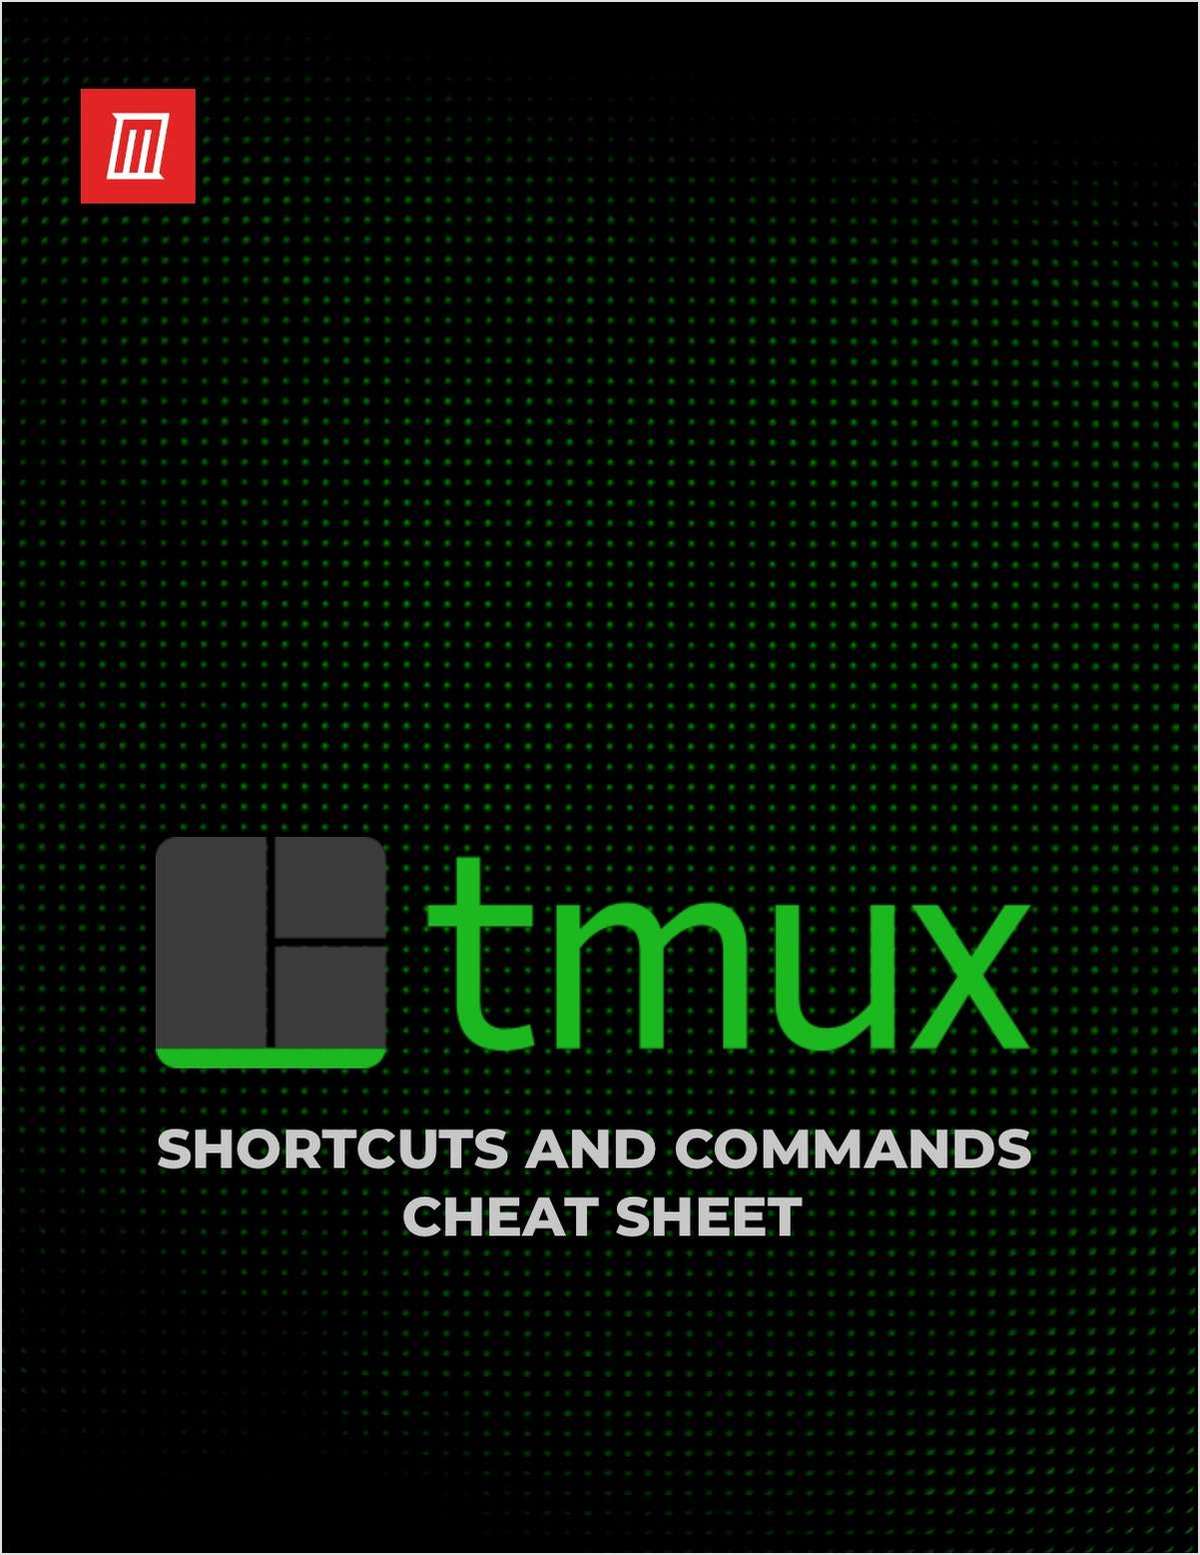 Key Tmux Shortcuts and Commands to Know